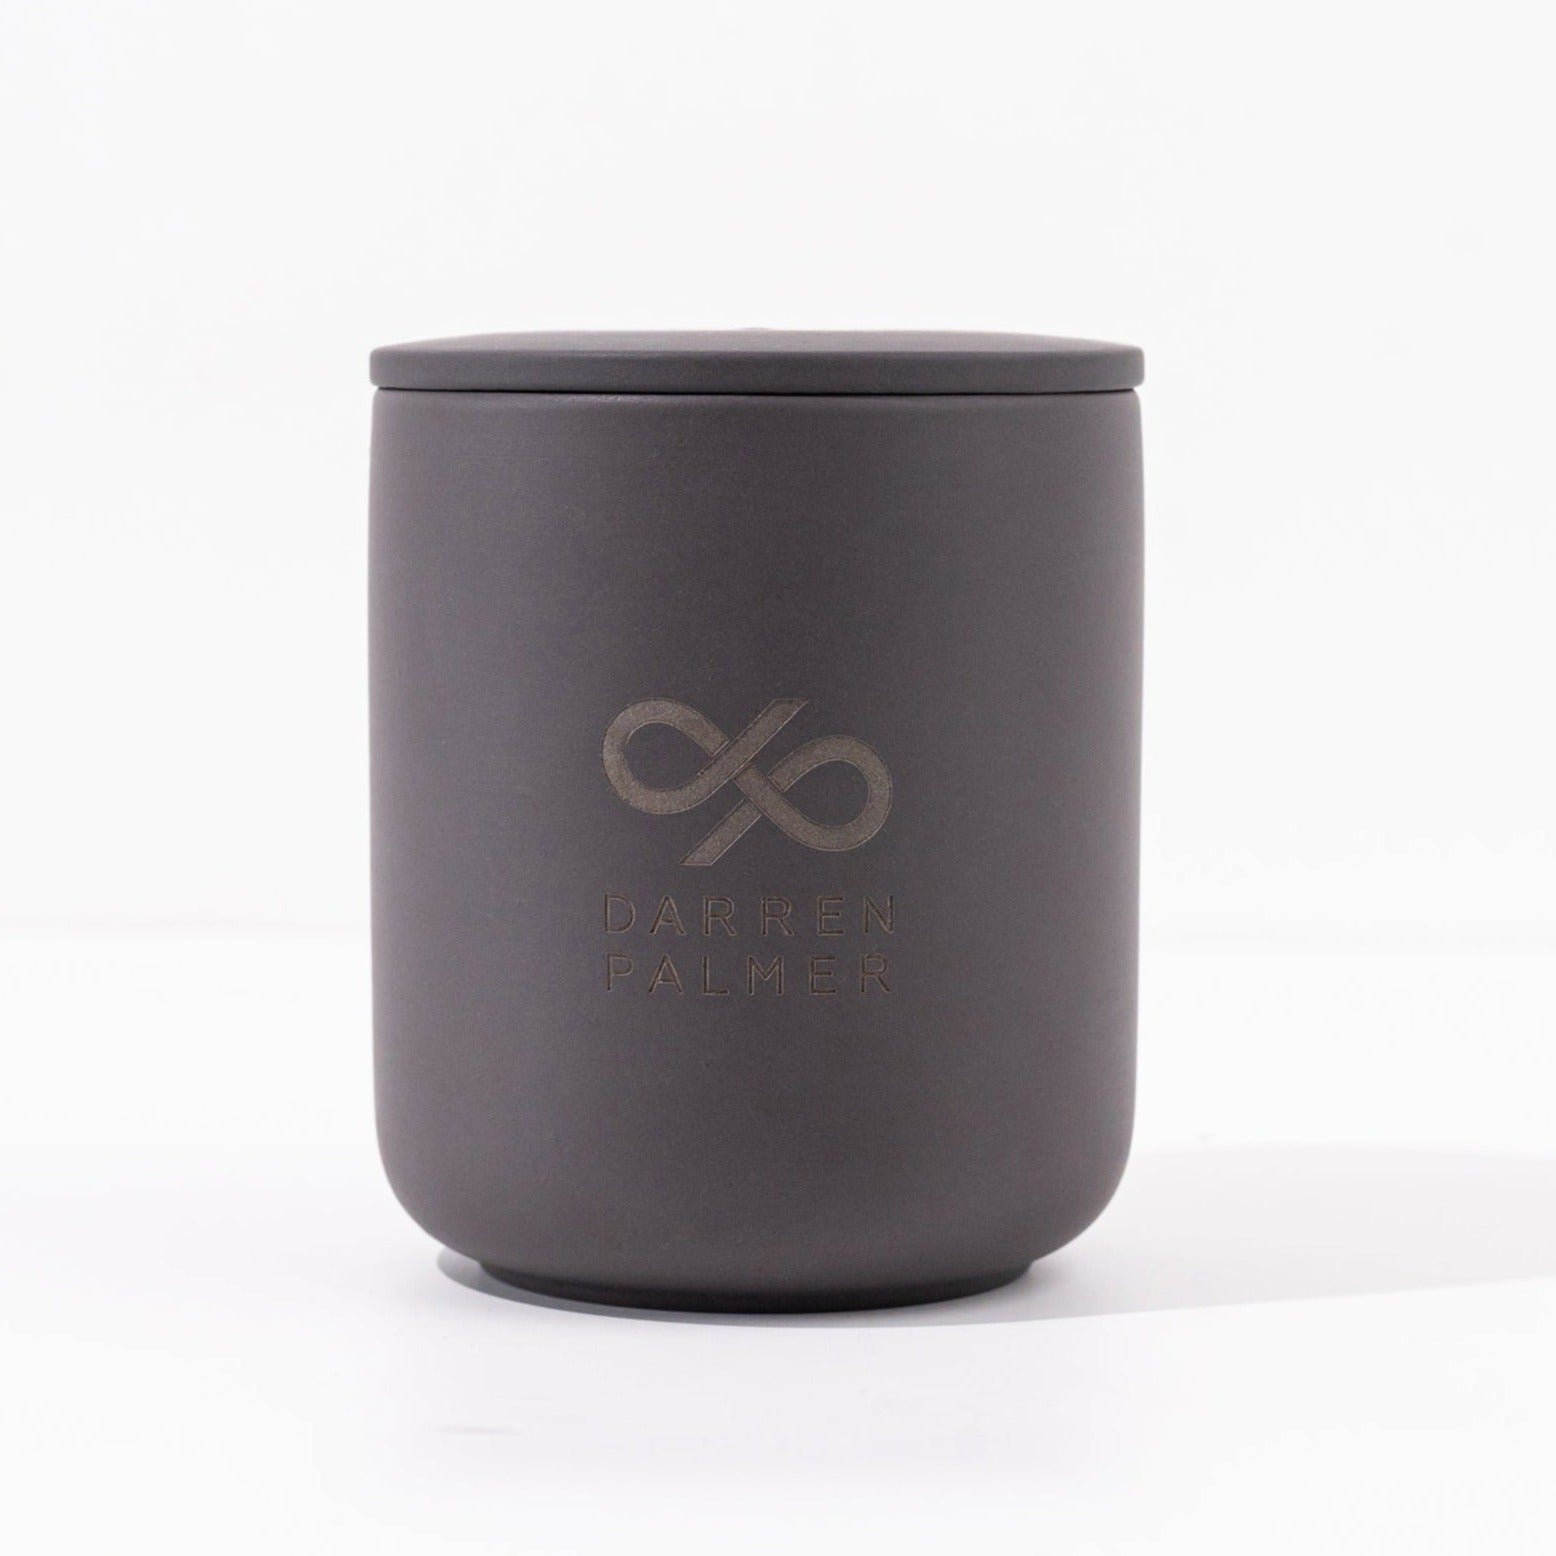 St. Sultry Fragrance Candle - Wood Wick Candle by Darren Palmer